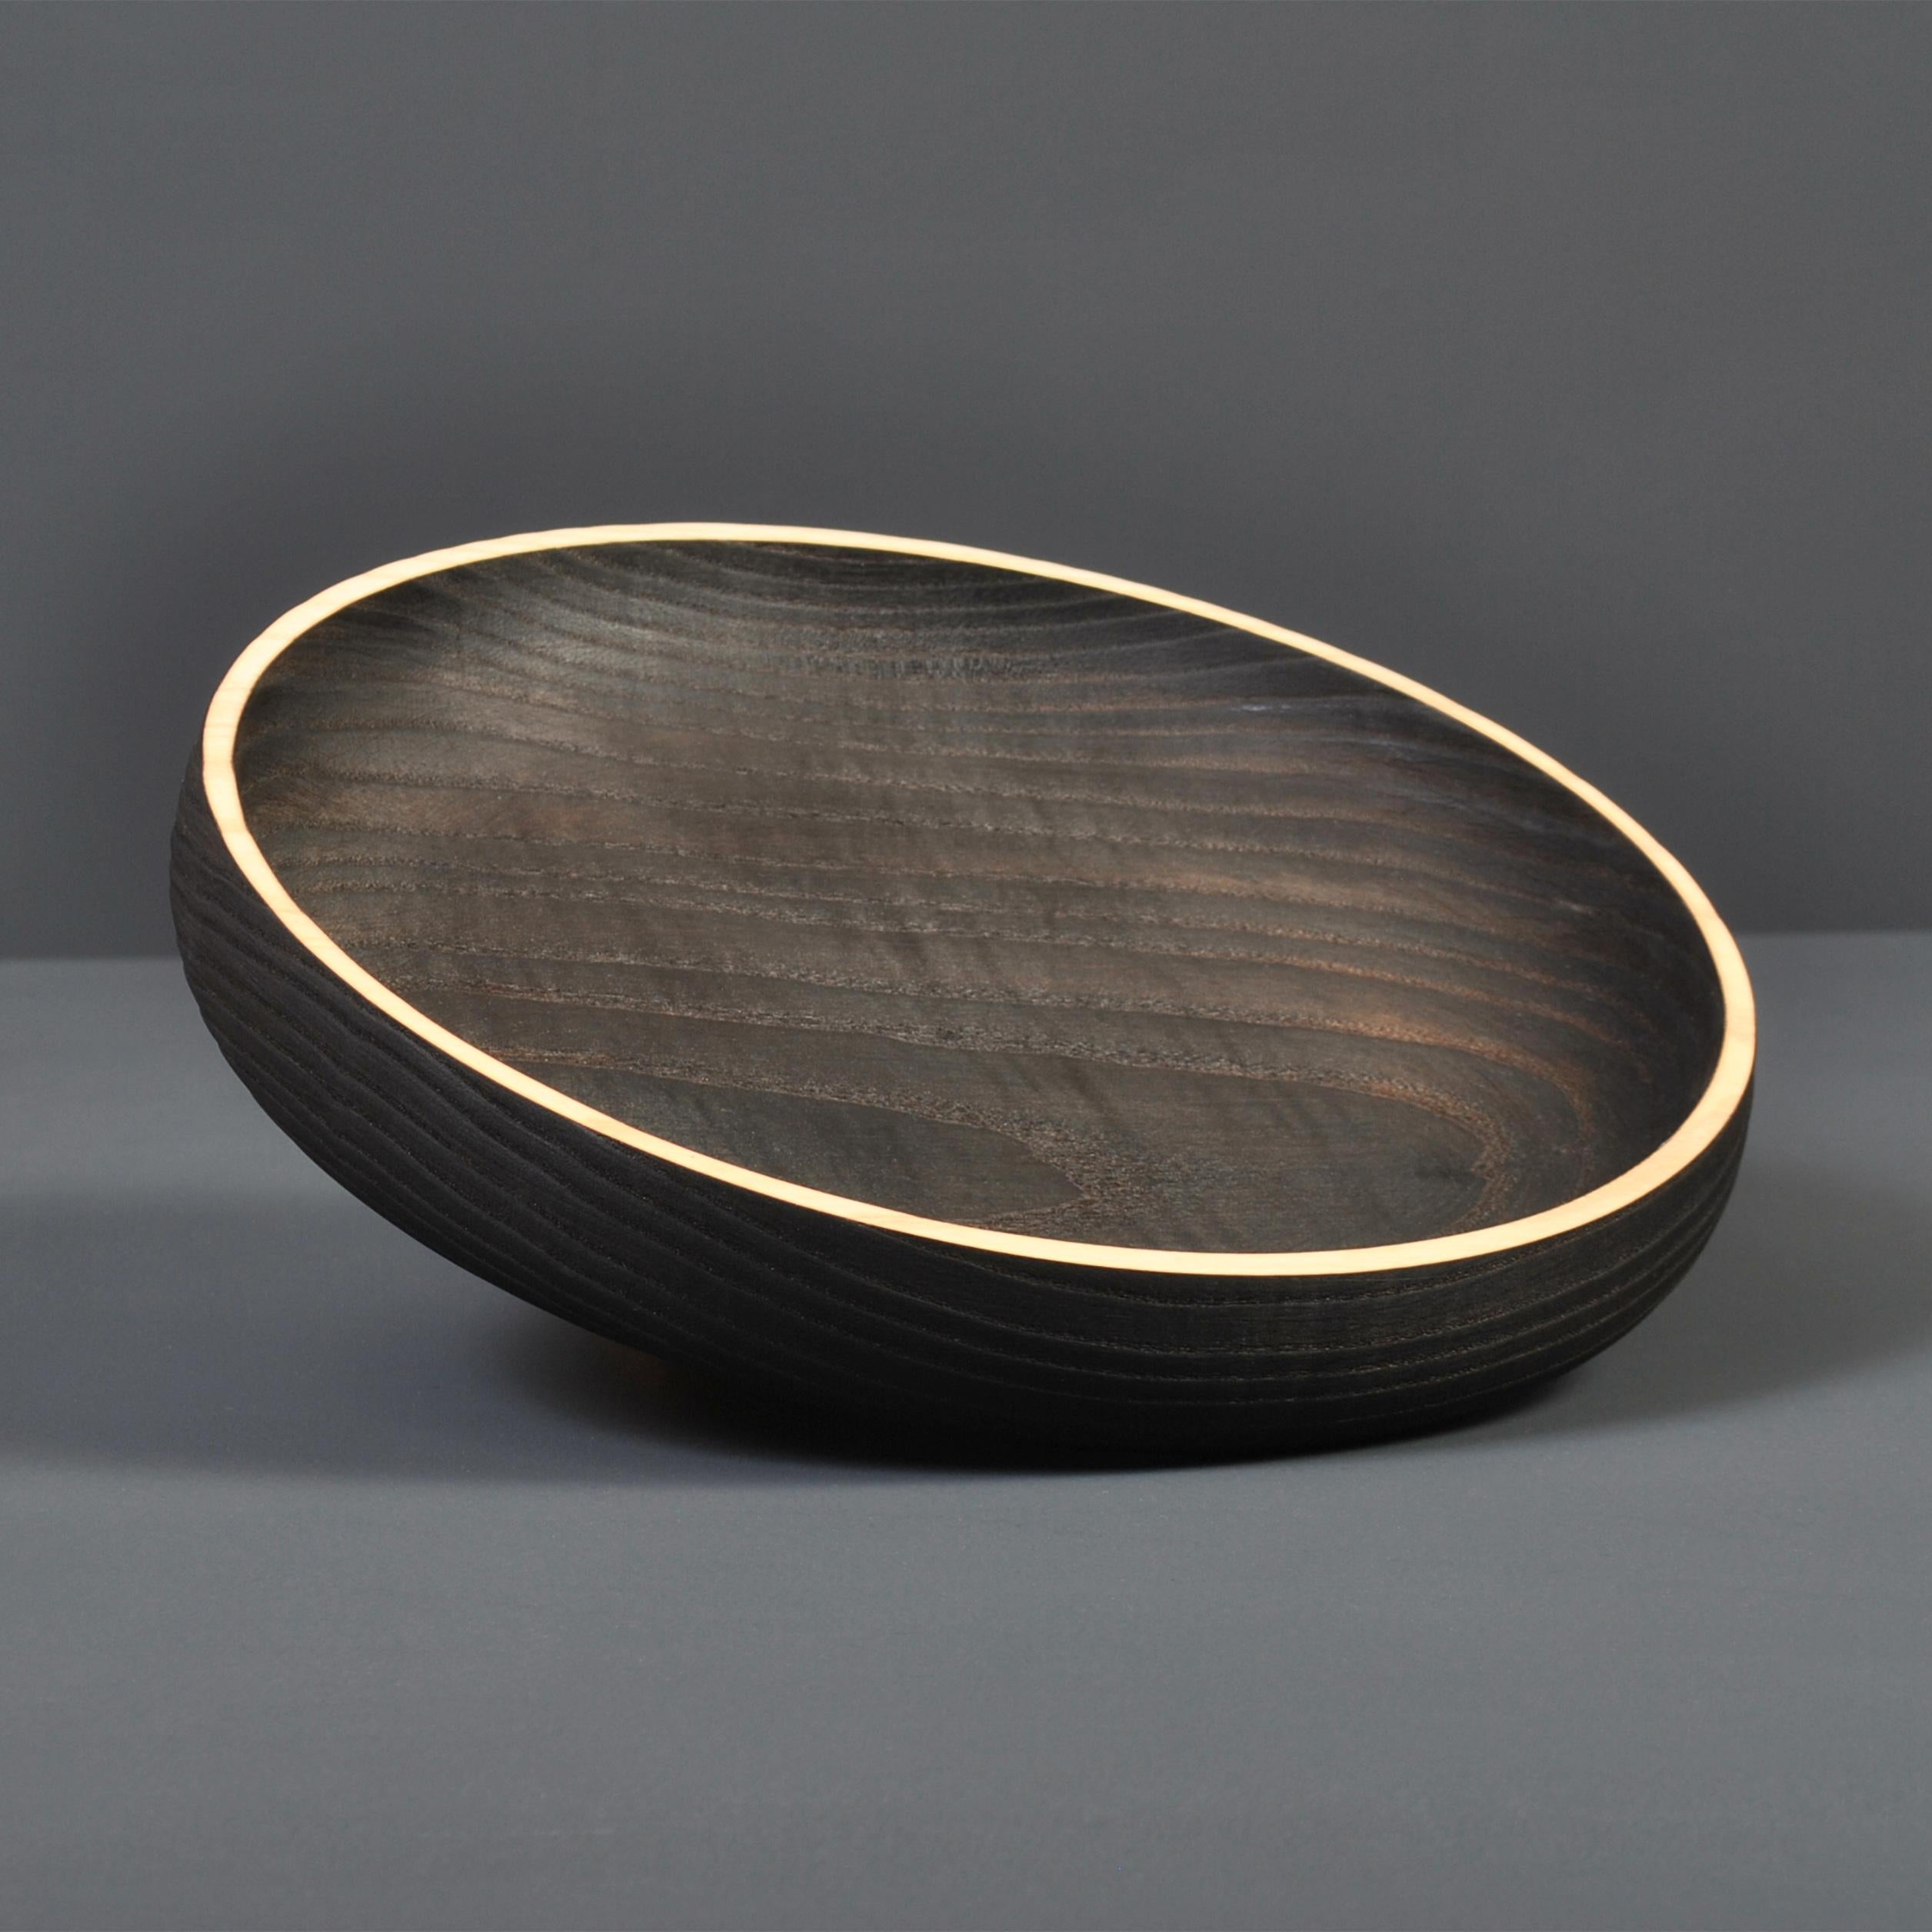 Fine traditionally hand-crafted and turned Ash platter finished with Japanese scorched yakisugi technique and natural rim. These are handmade to the very best quality in London.
Finished in food safe oils.
A beautiful piece of handmade contemporary